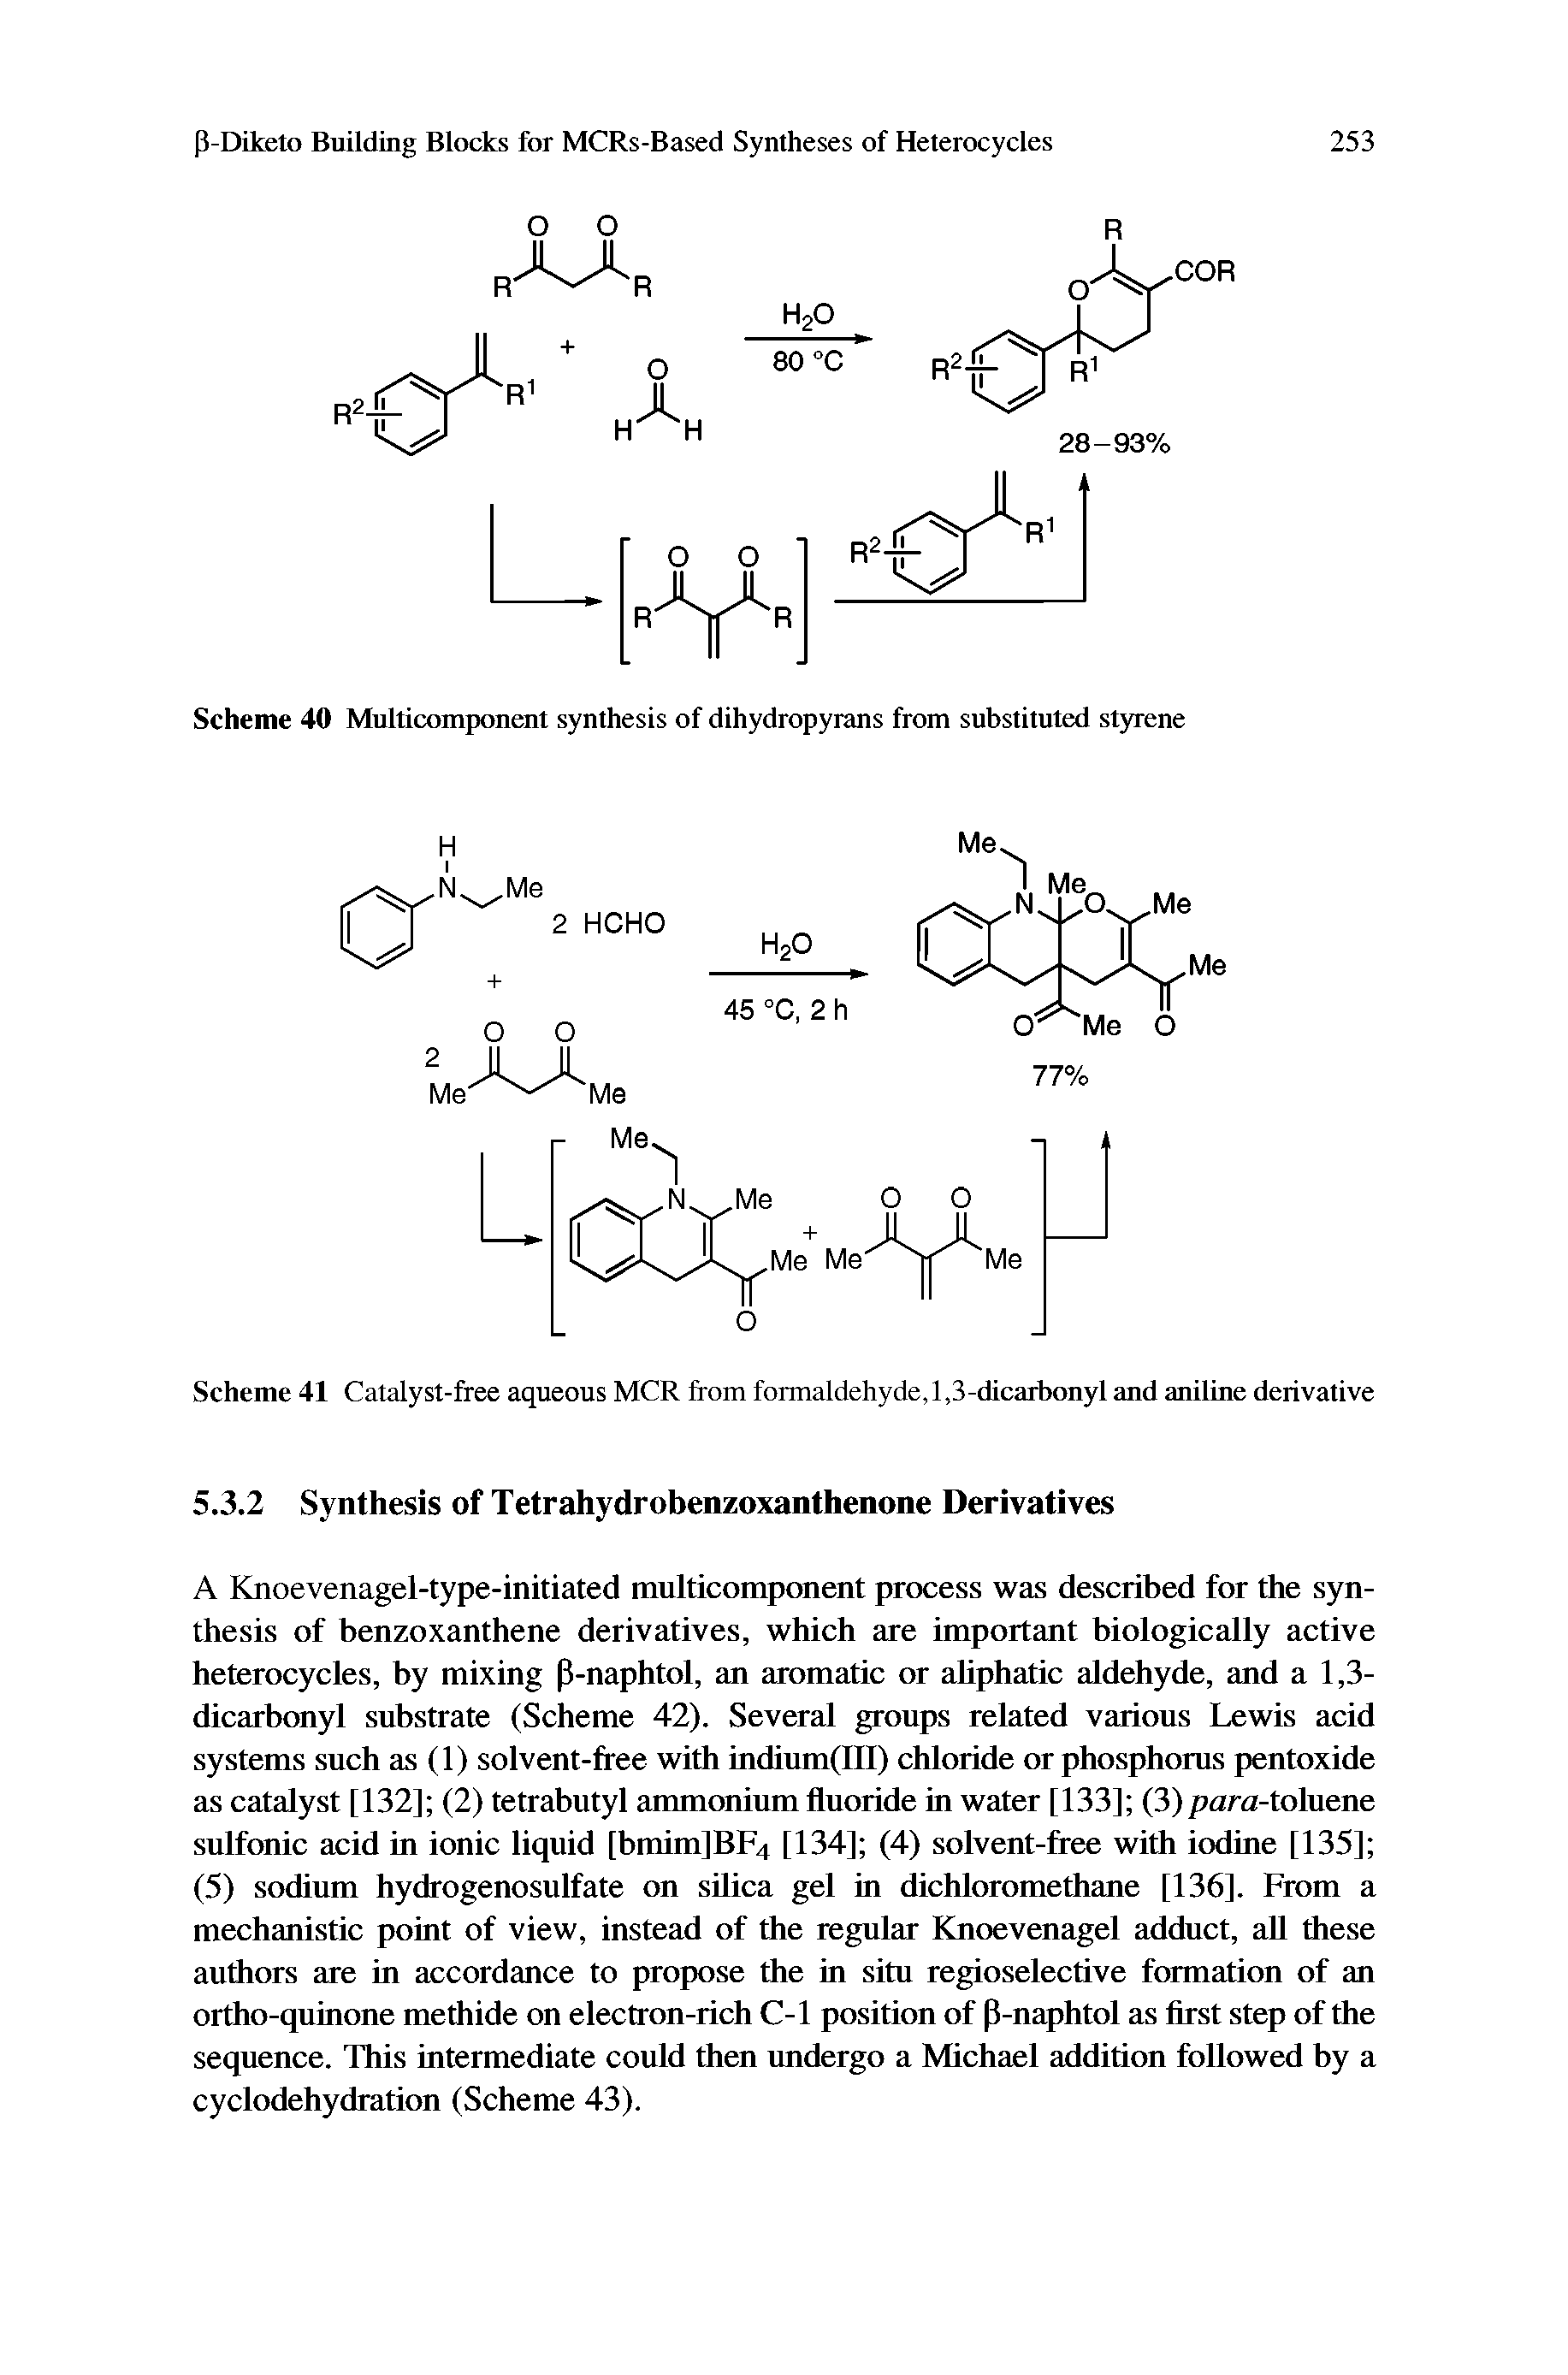 Scheme 41 Catalyst-free aqueous MCR from formaldehyde,1,3-dicarbonyl and aniline derivative...